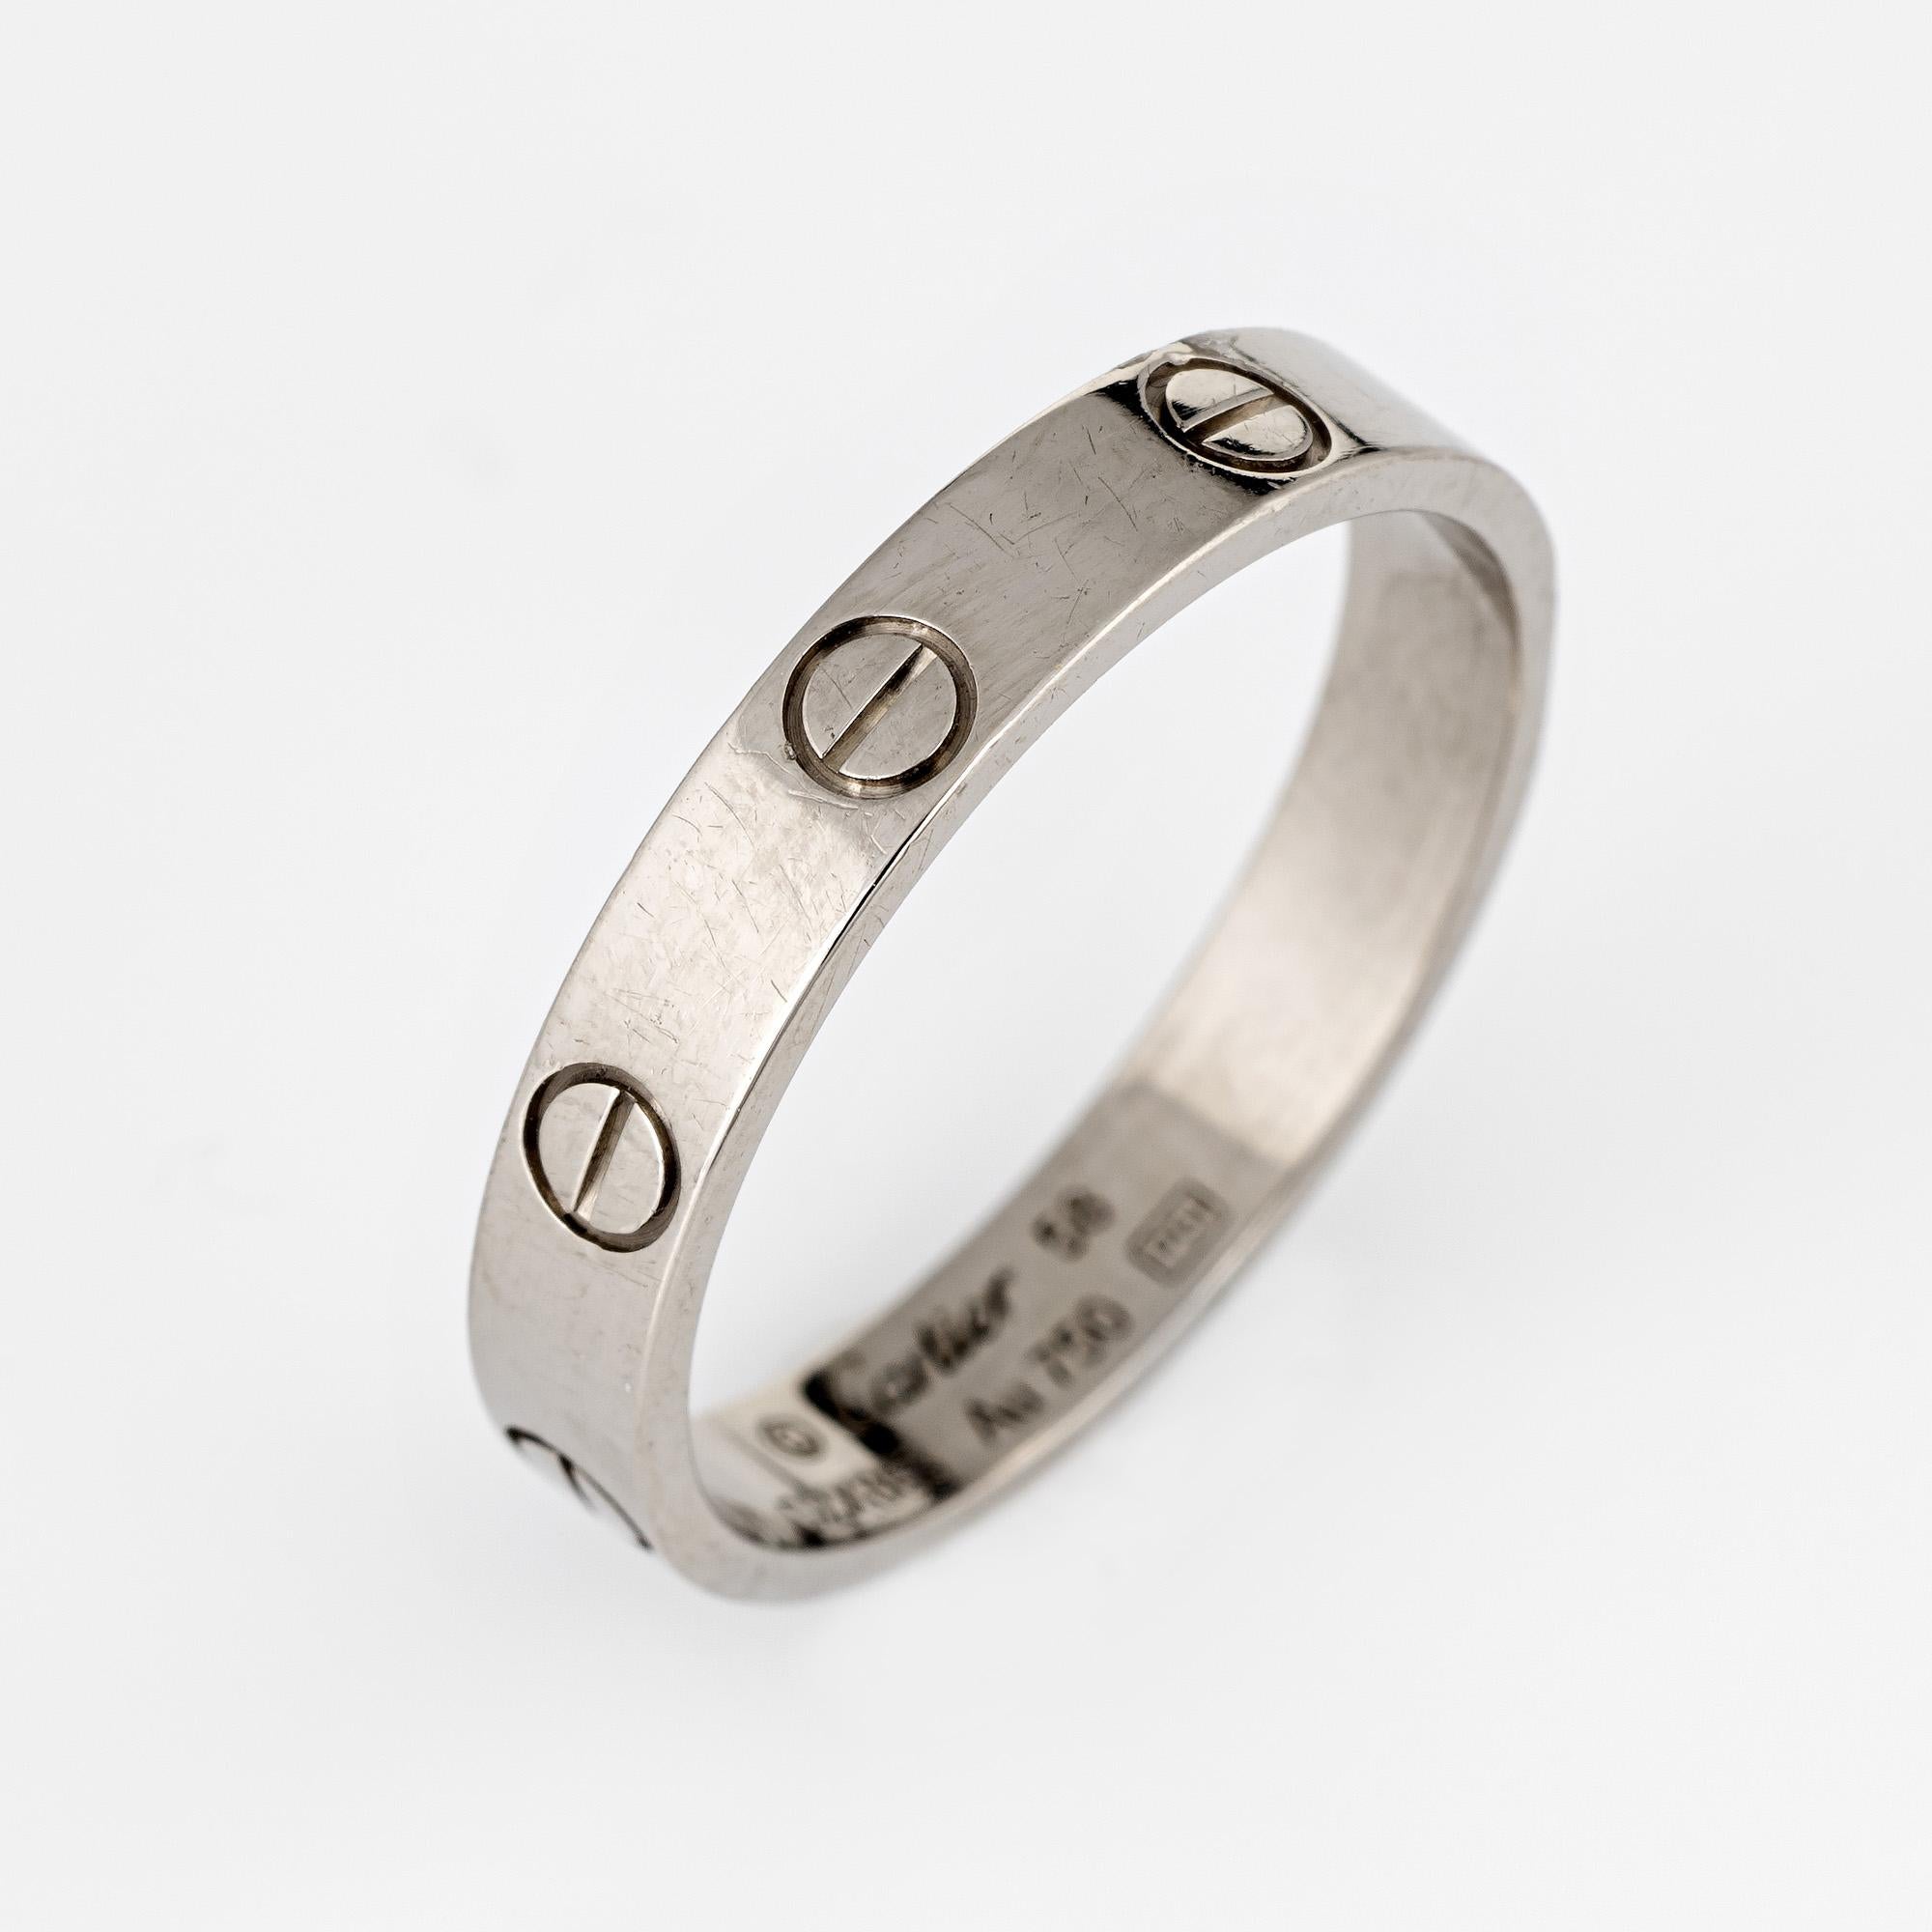 Cartier love wedding band crafted in 18 karat white gold.  

The ring currently retails for $1,140 (plus taxes).

The ring is in very good condition and was recently professionally cleaned and polished. No box or papers.

Particulars:

Weight: 3.8